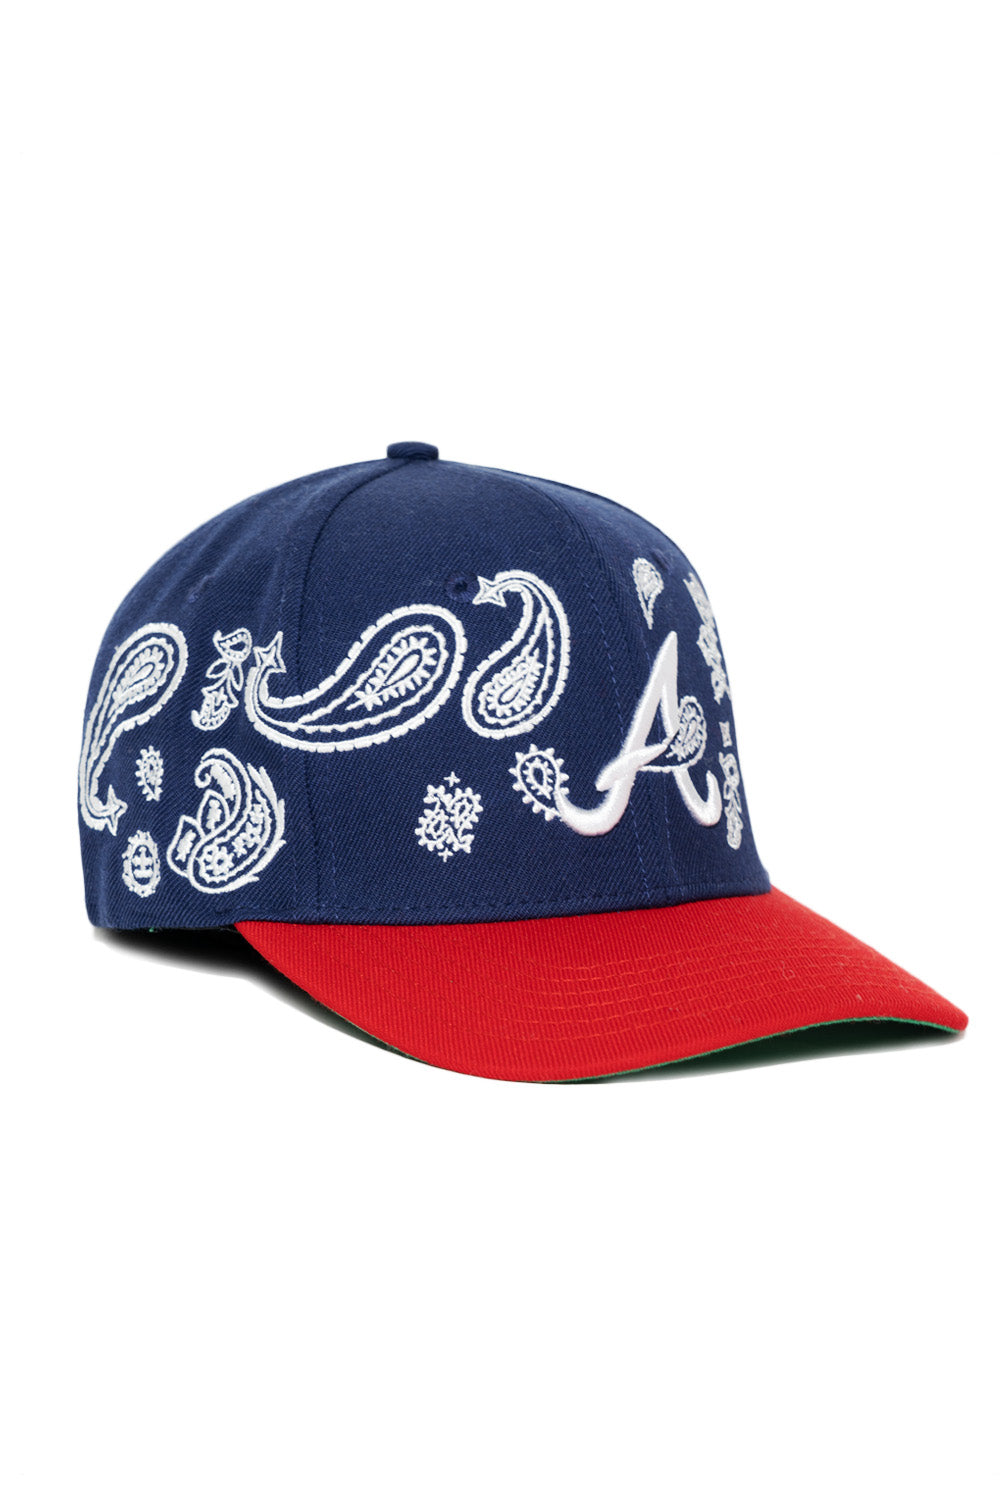 PAISLEY CITY TOUR FITTED (NAVY/RED ATLANTA)